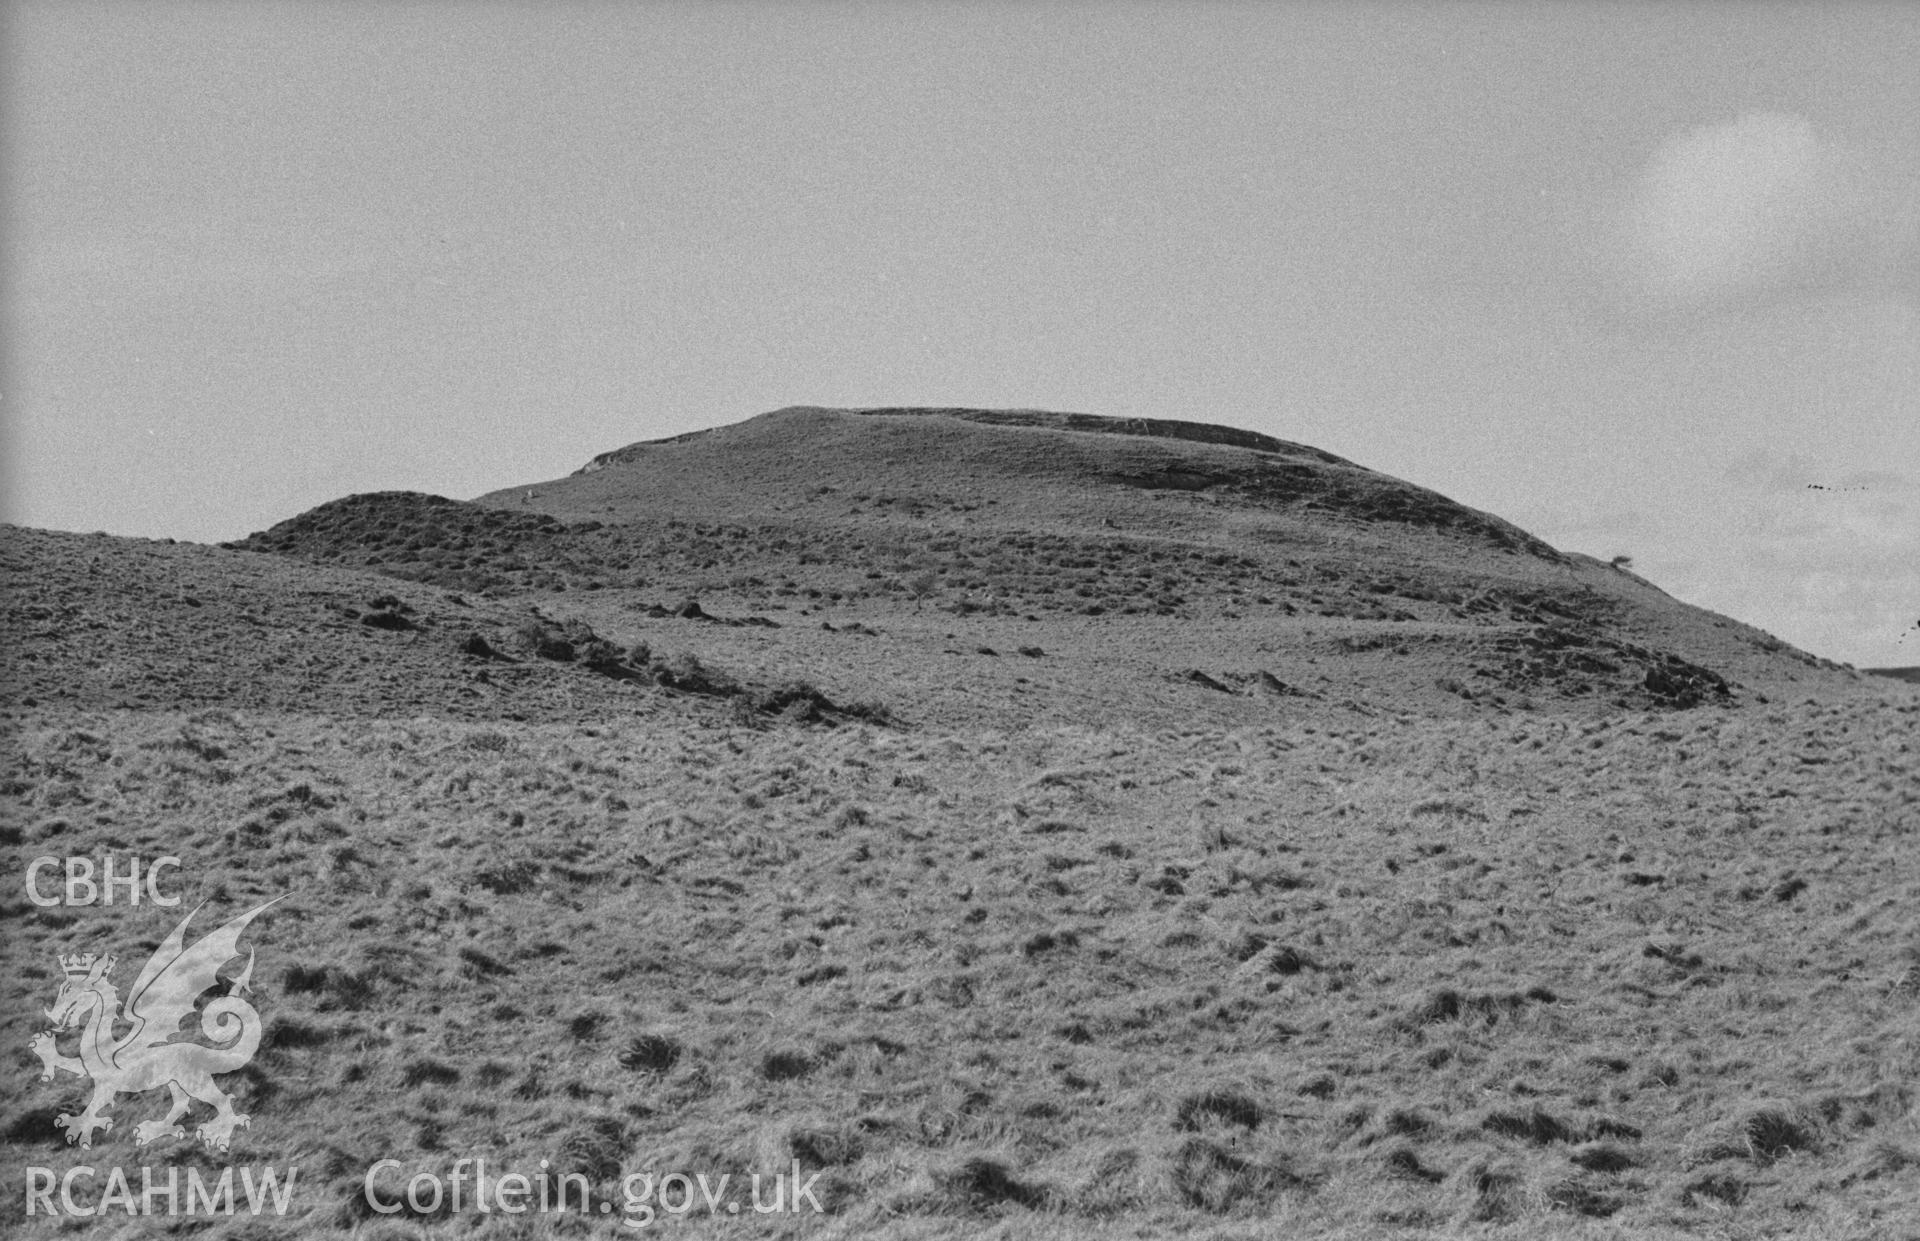 Digital copy of a black and white negative showing view of Pen Dinas, Elerch. Photographed in April 1963 by Arthur O. Chater from Grid Reference SN 678 875, looking north north west.